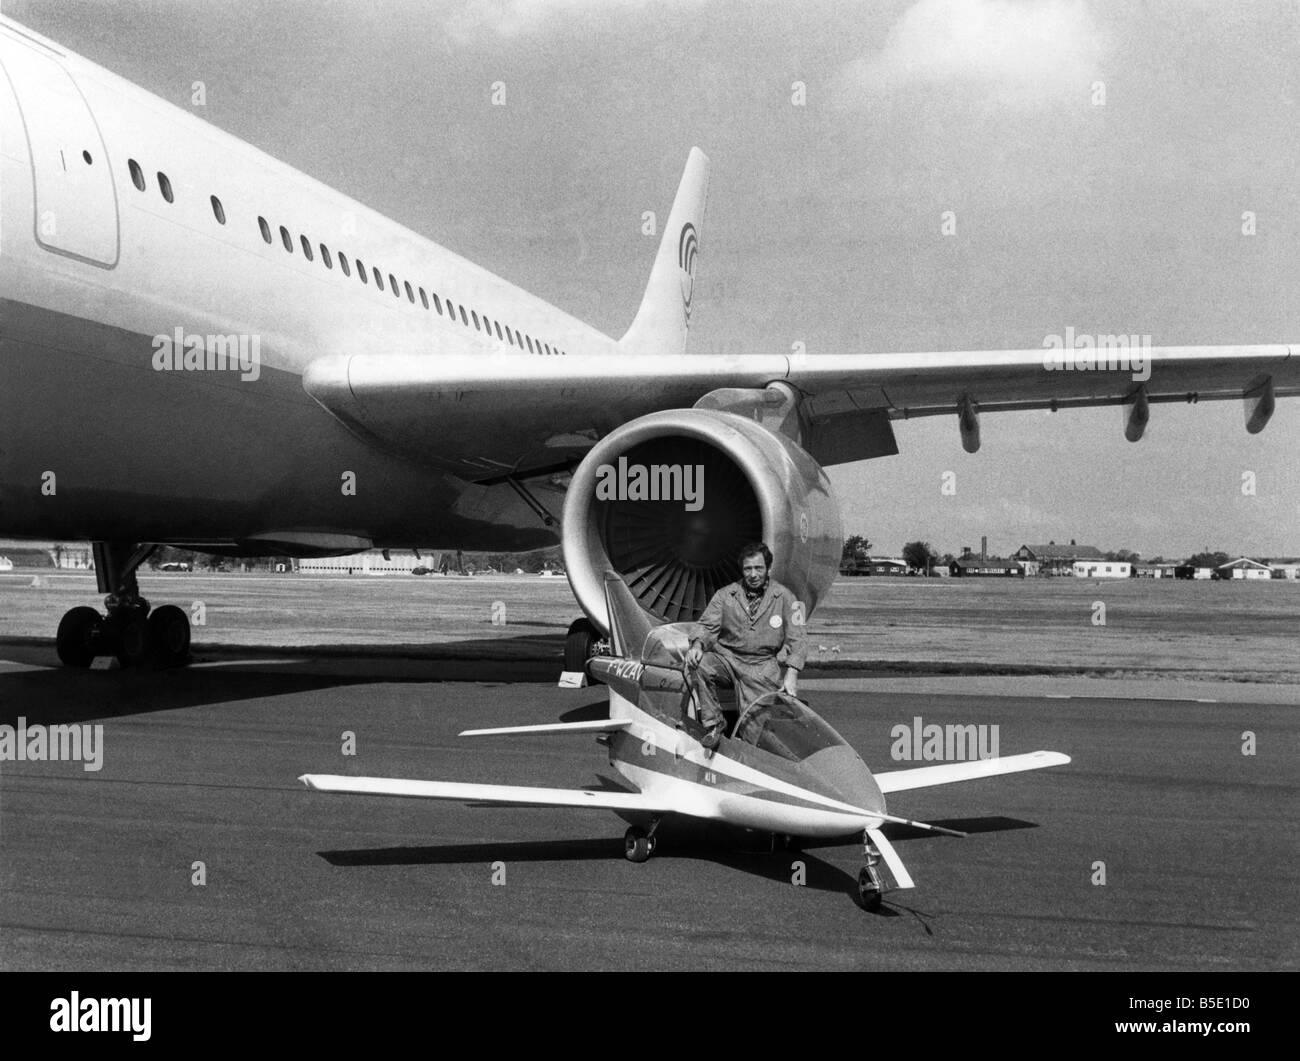 Farnborough 1976: The 1976 Air Show at Farnborough, Hampshire, began on Sunday (5-9-76). The Bede B.D. 5 J.: This is the smallest jet plane in the world measuring 12.4 feet long. It was built in France and is only 5 foot 11 inches high, which is quite obvious as it is dwarfed by a single engine of a European Air bus. September 1976 P001074 Stock Photo